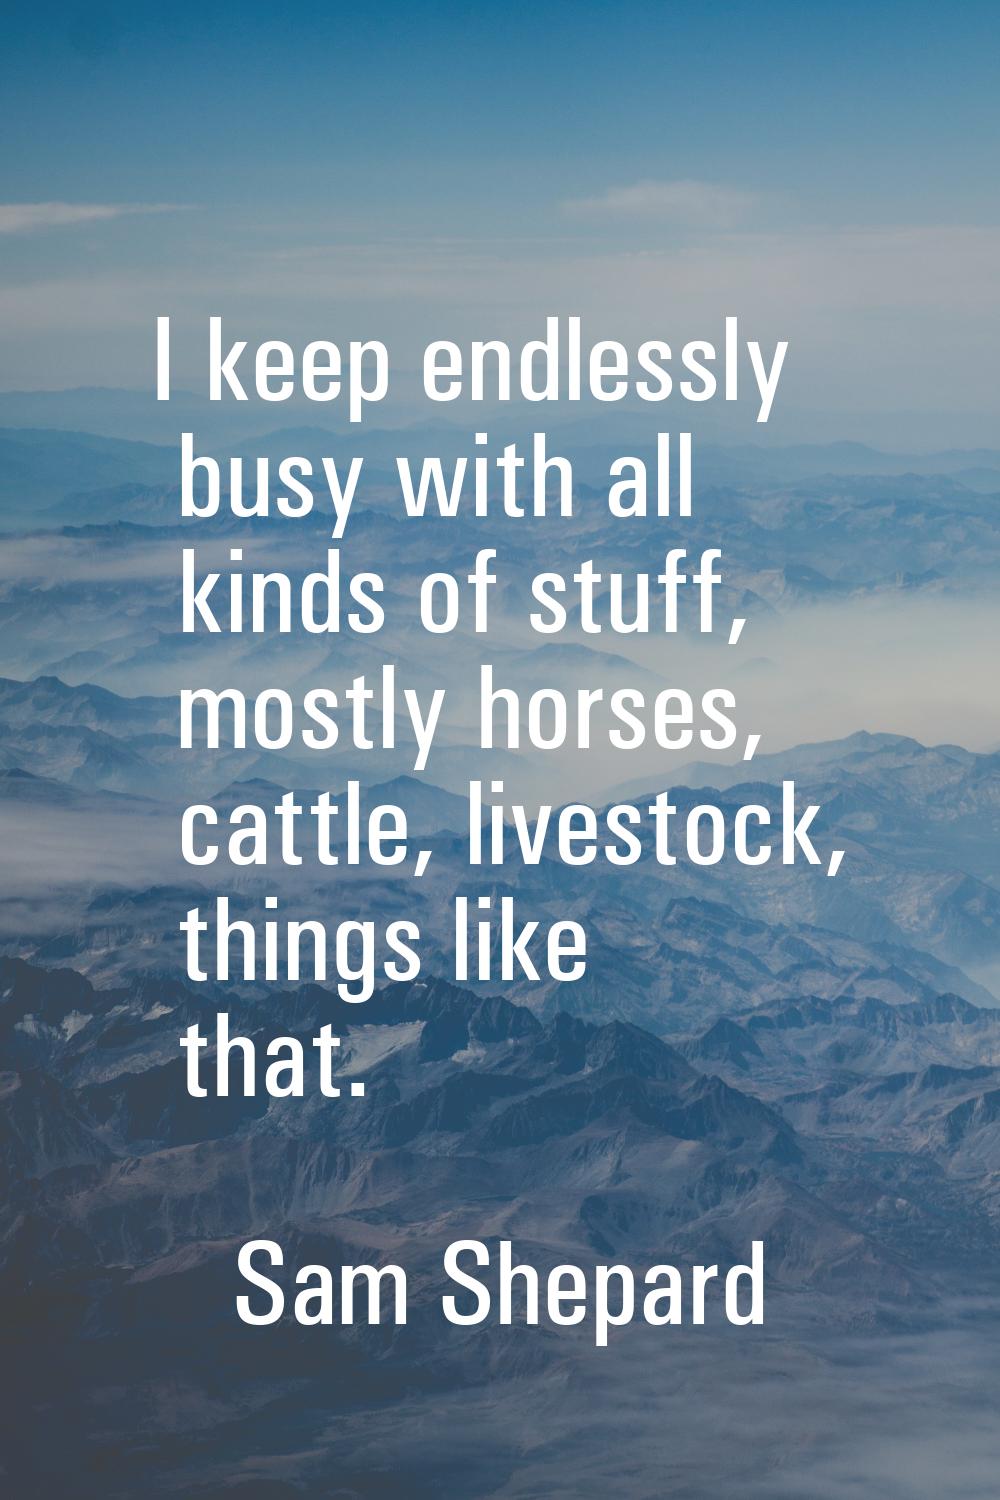 I keep endlessly busy with all kinds of stuff, mostly horses, cattle, livestock, things like that.